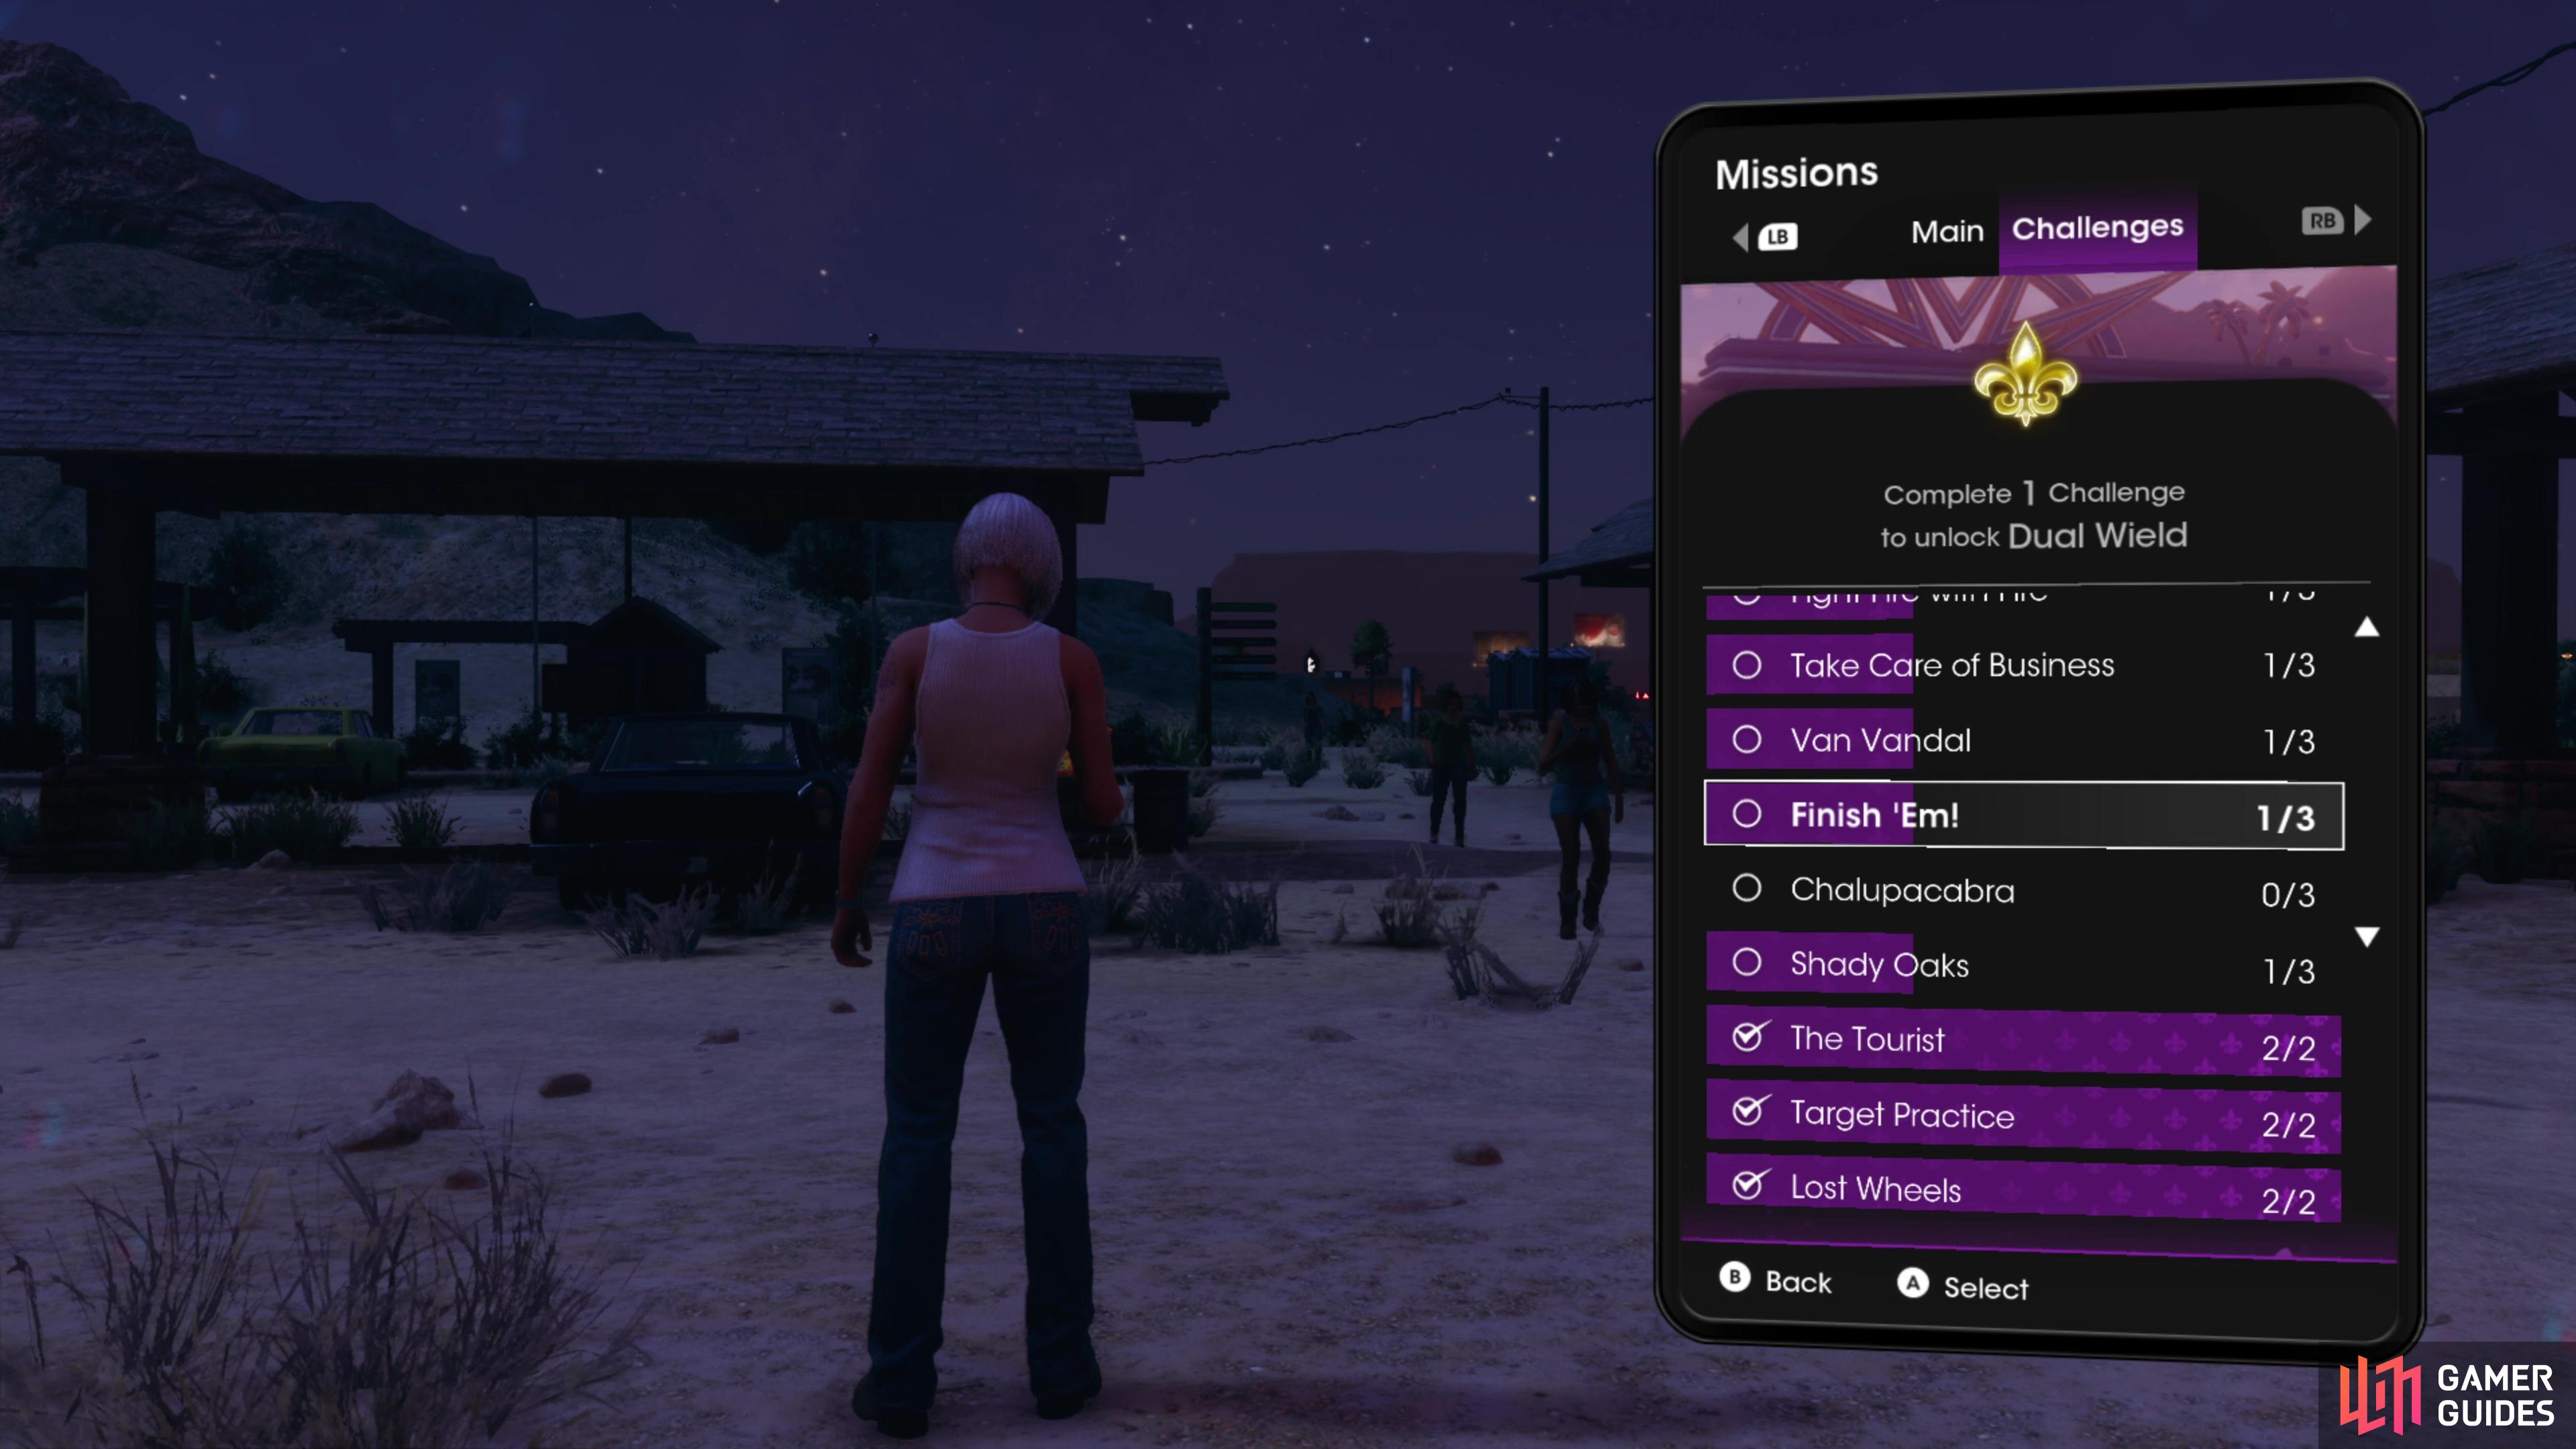 Complete Challenges in Saints Row,